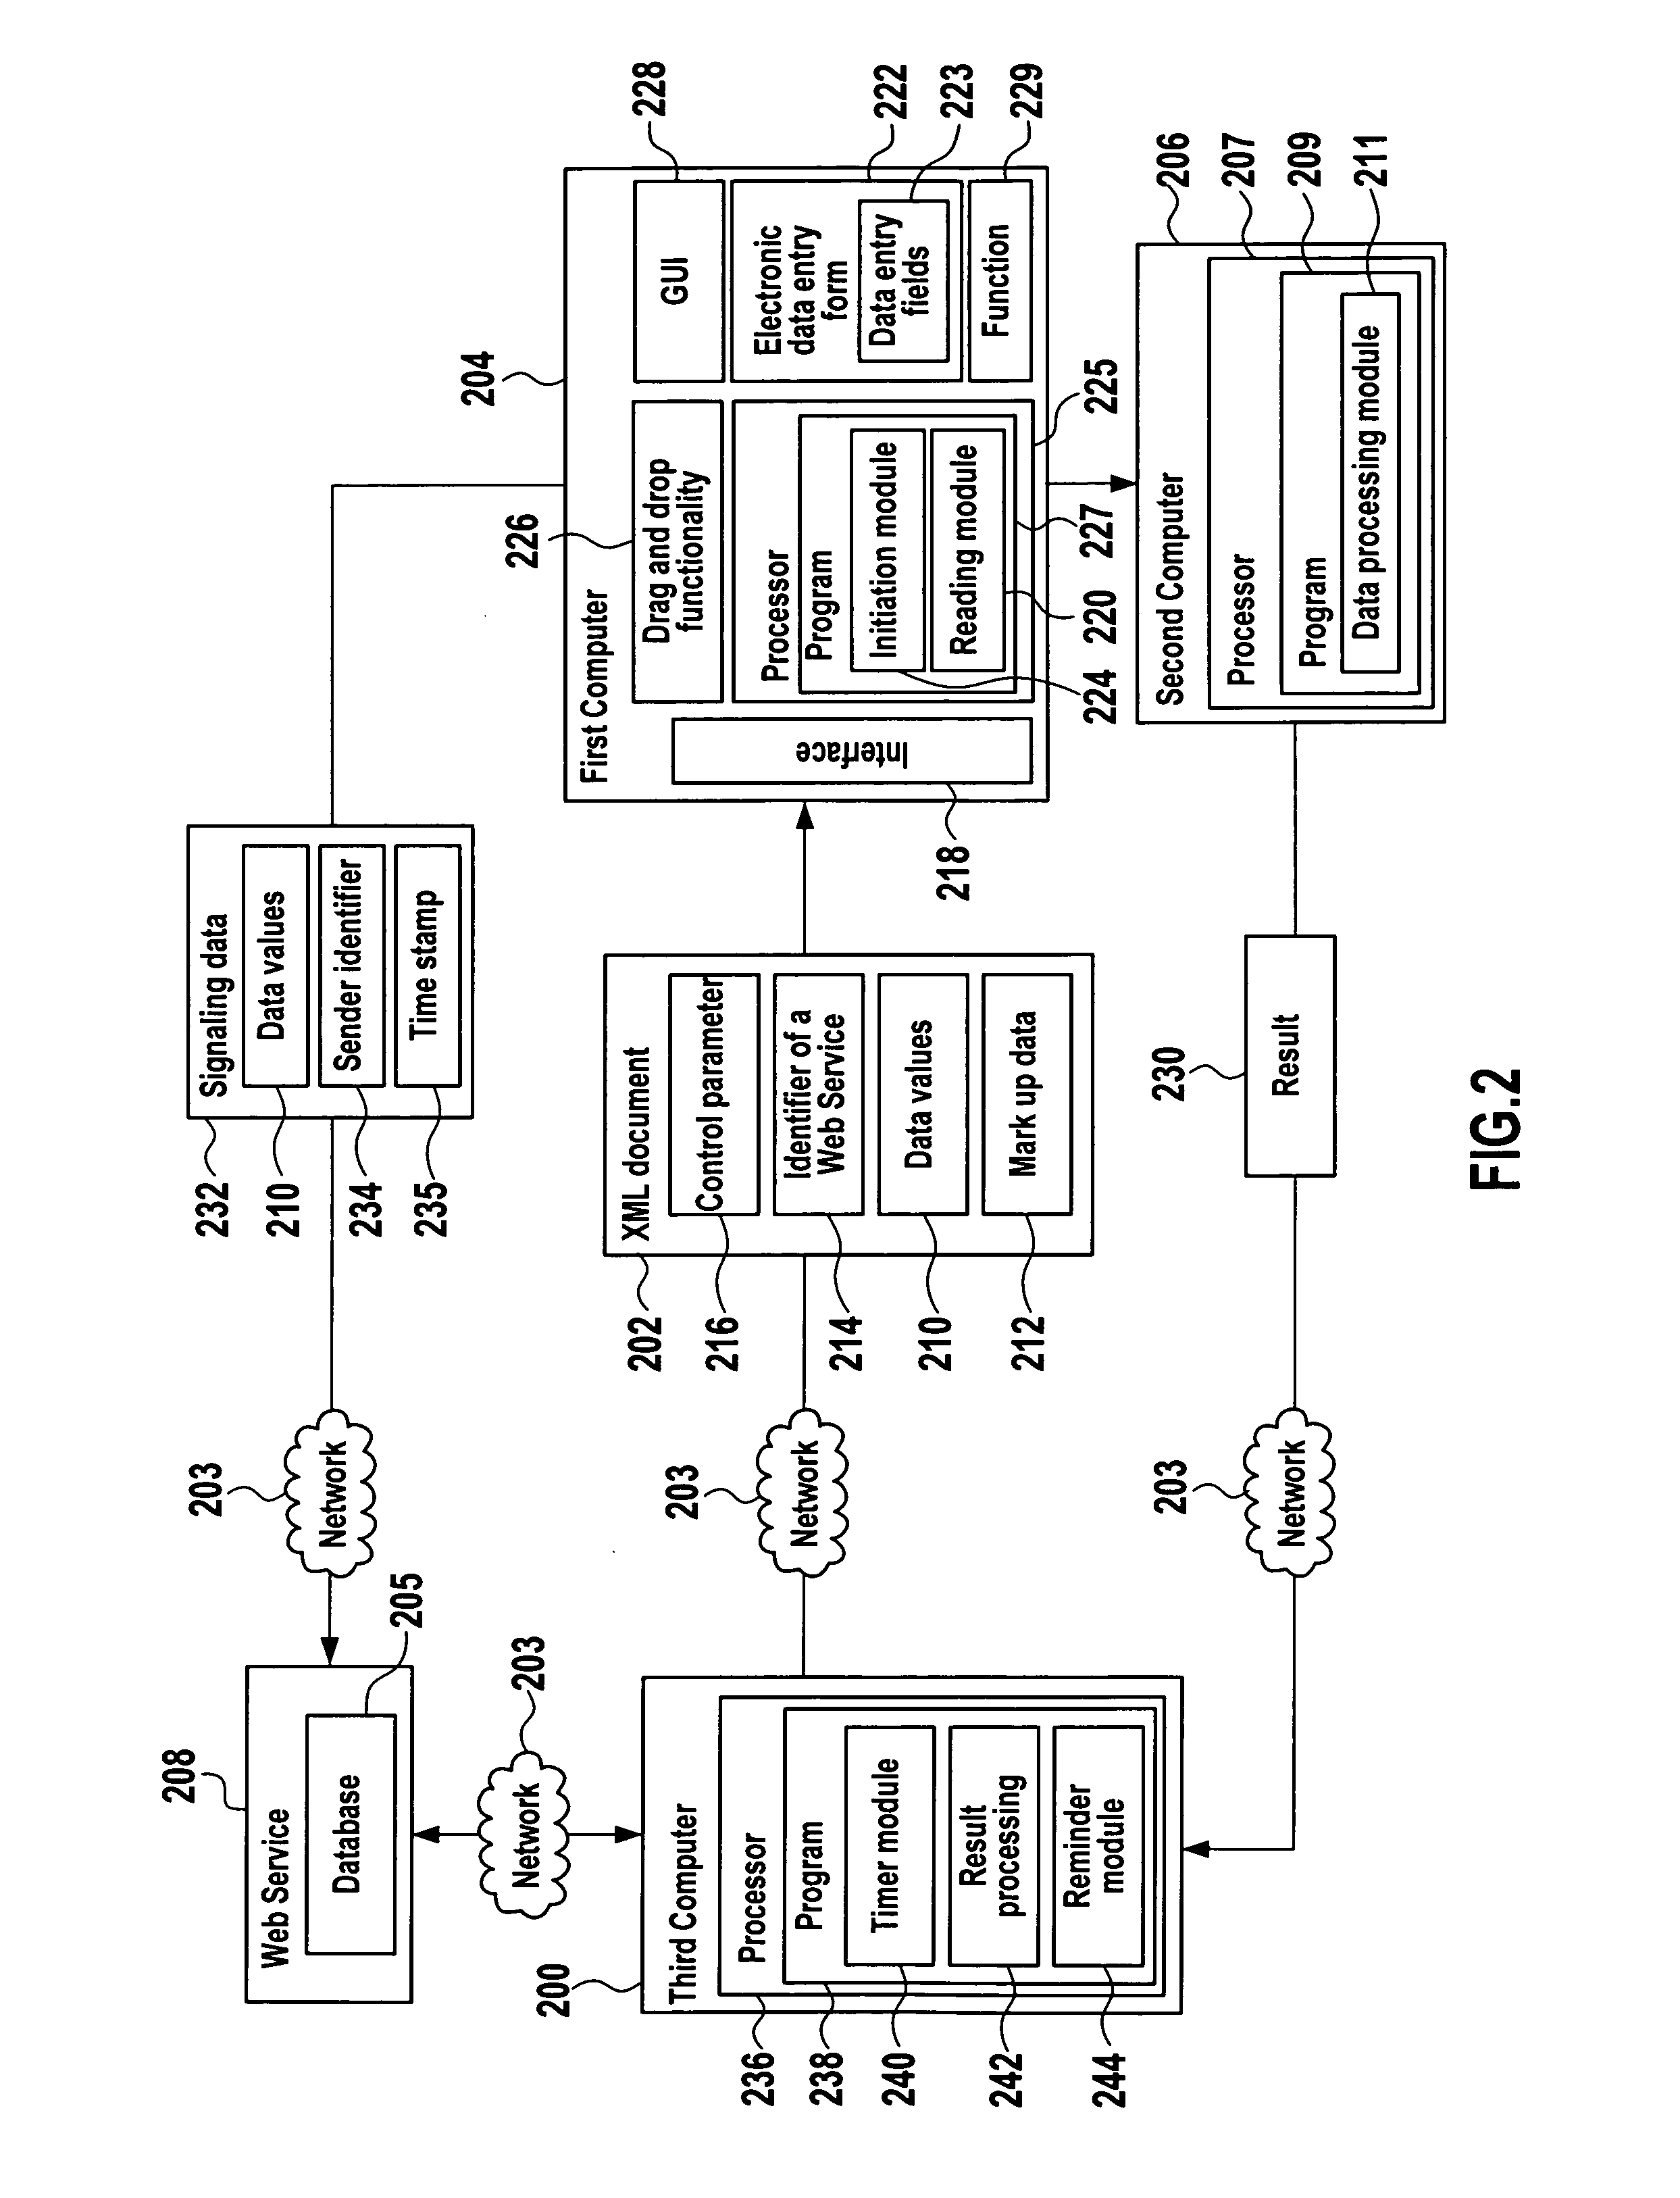 Data processing methods, systems and computer programs for providing a payment